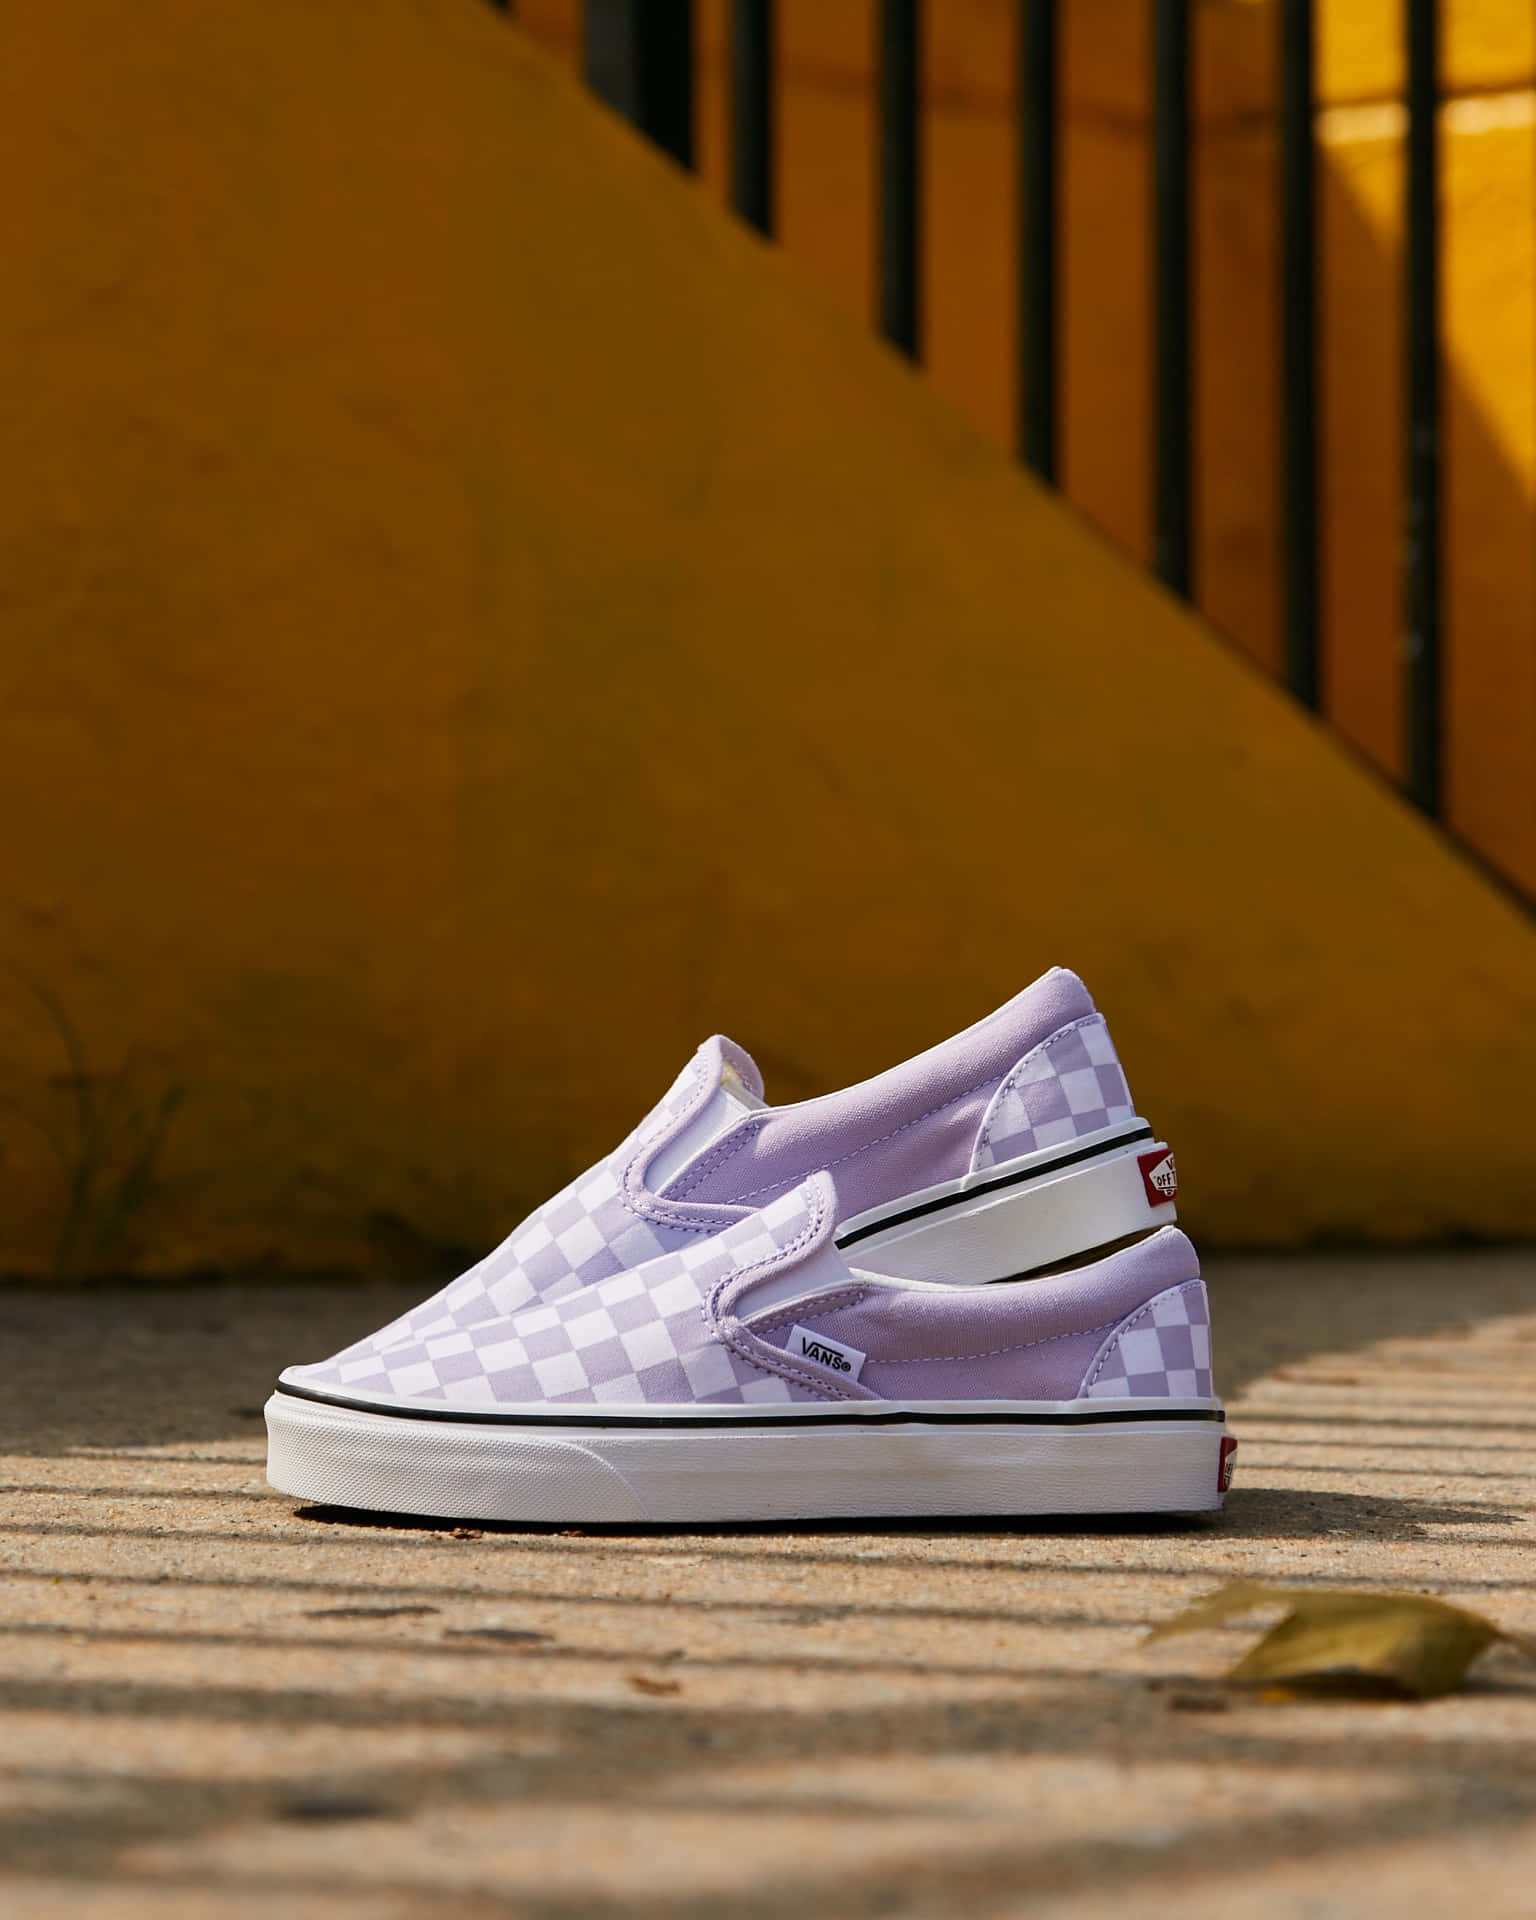 Power through your day with Vans skate shoes!